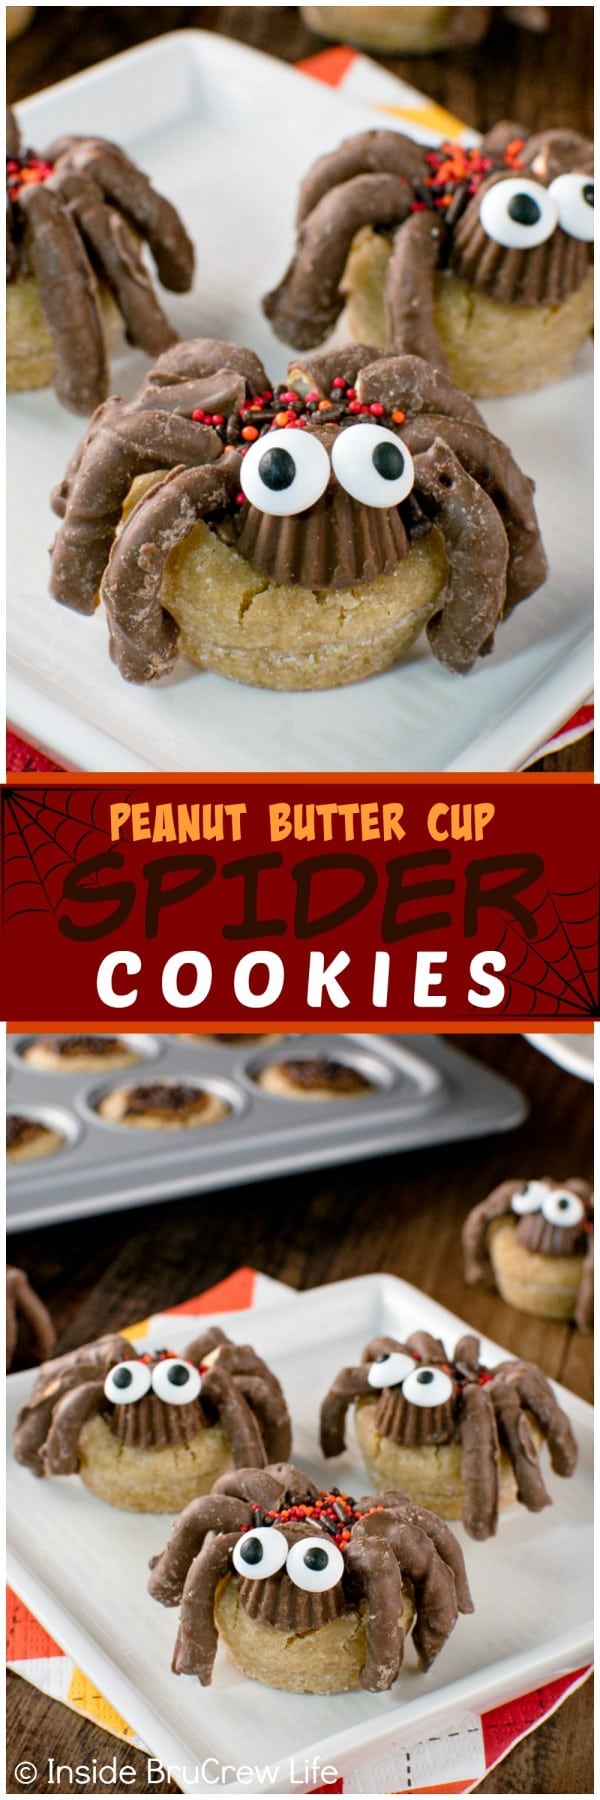 Two pictures of peanut butter cup spider cookies collaged together with a red text box